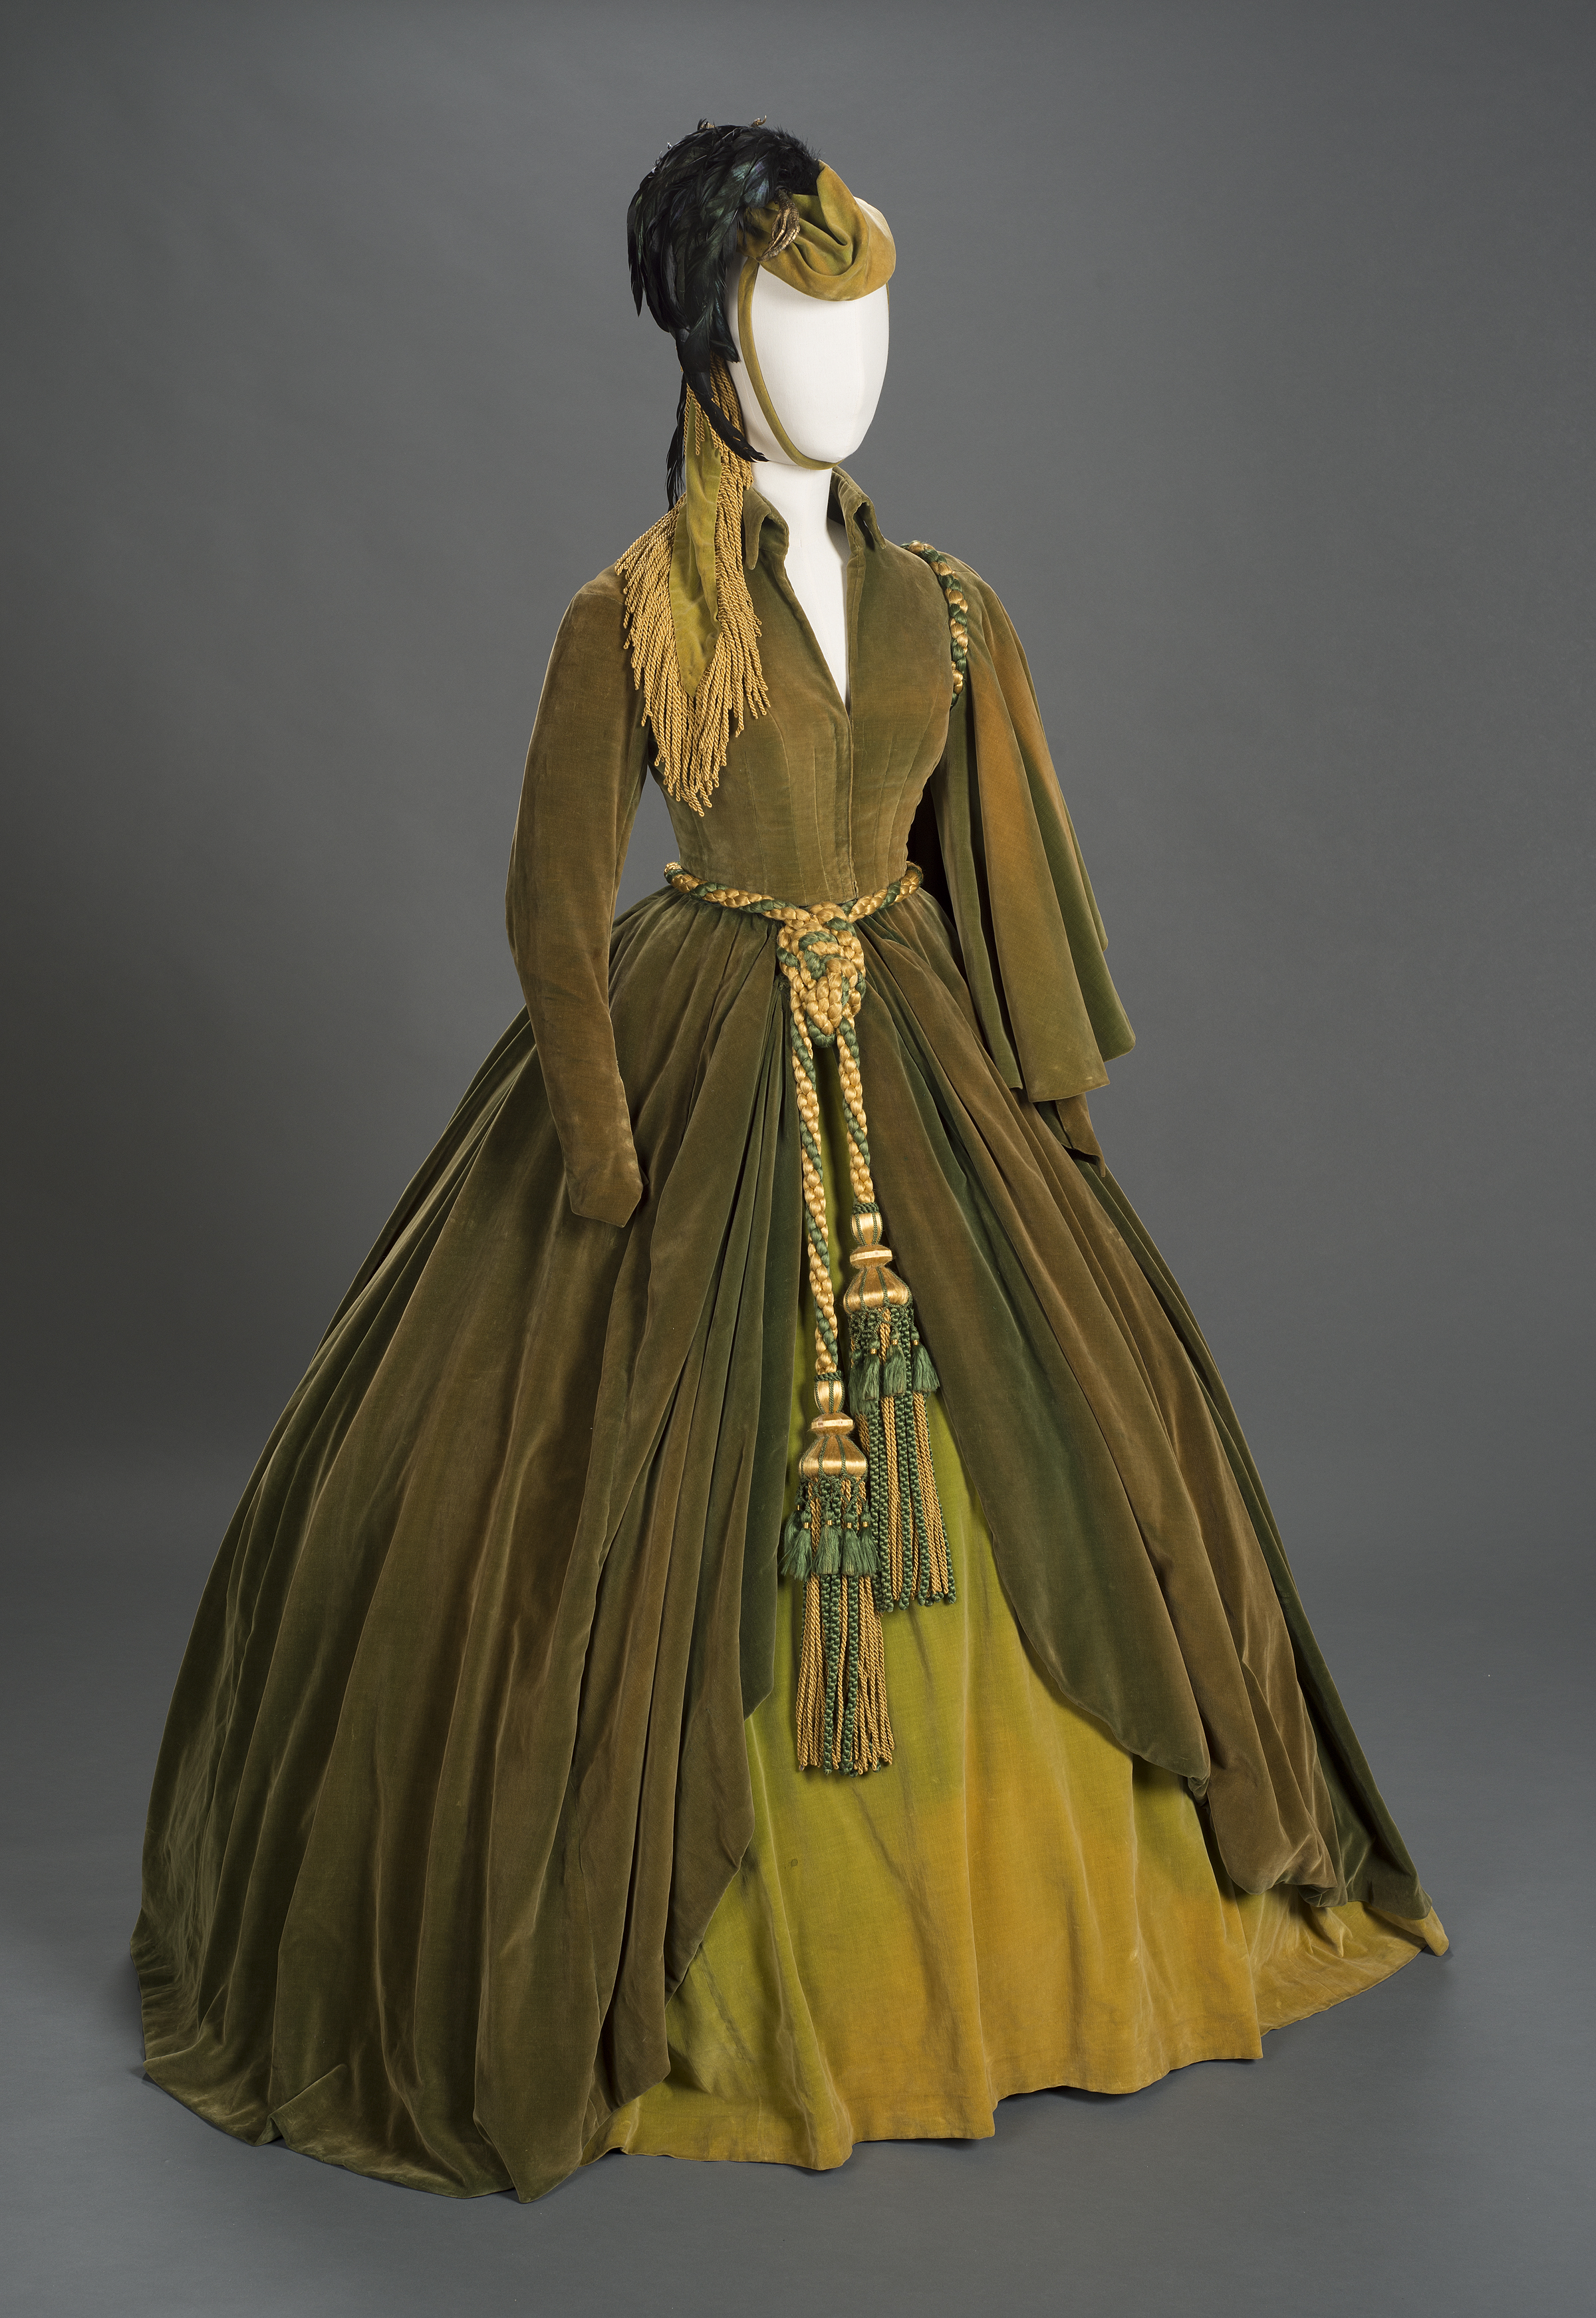 The conserved green curtain dress and hat worn by Vivien Leigh as Scarlett O'Hara in "Gone With The Wind." Photo by Pete Smith.